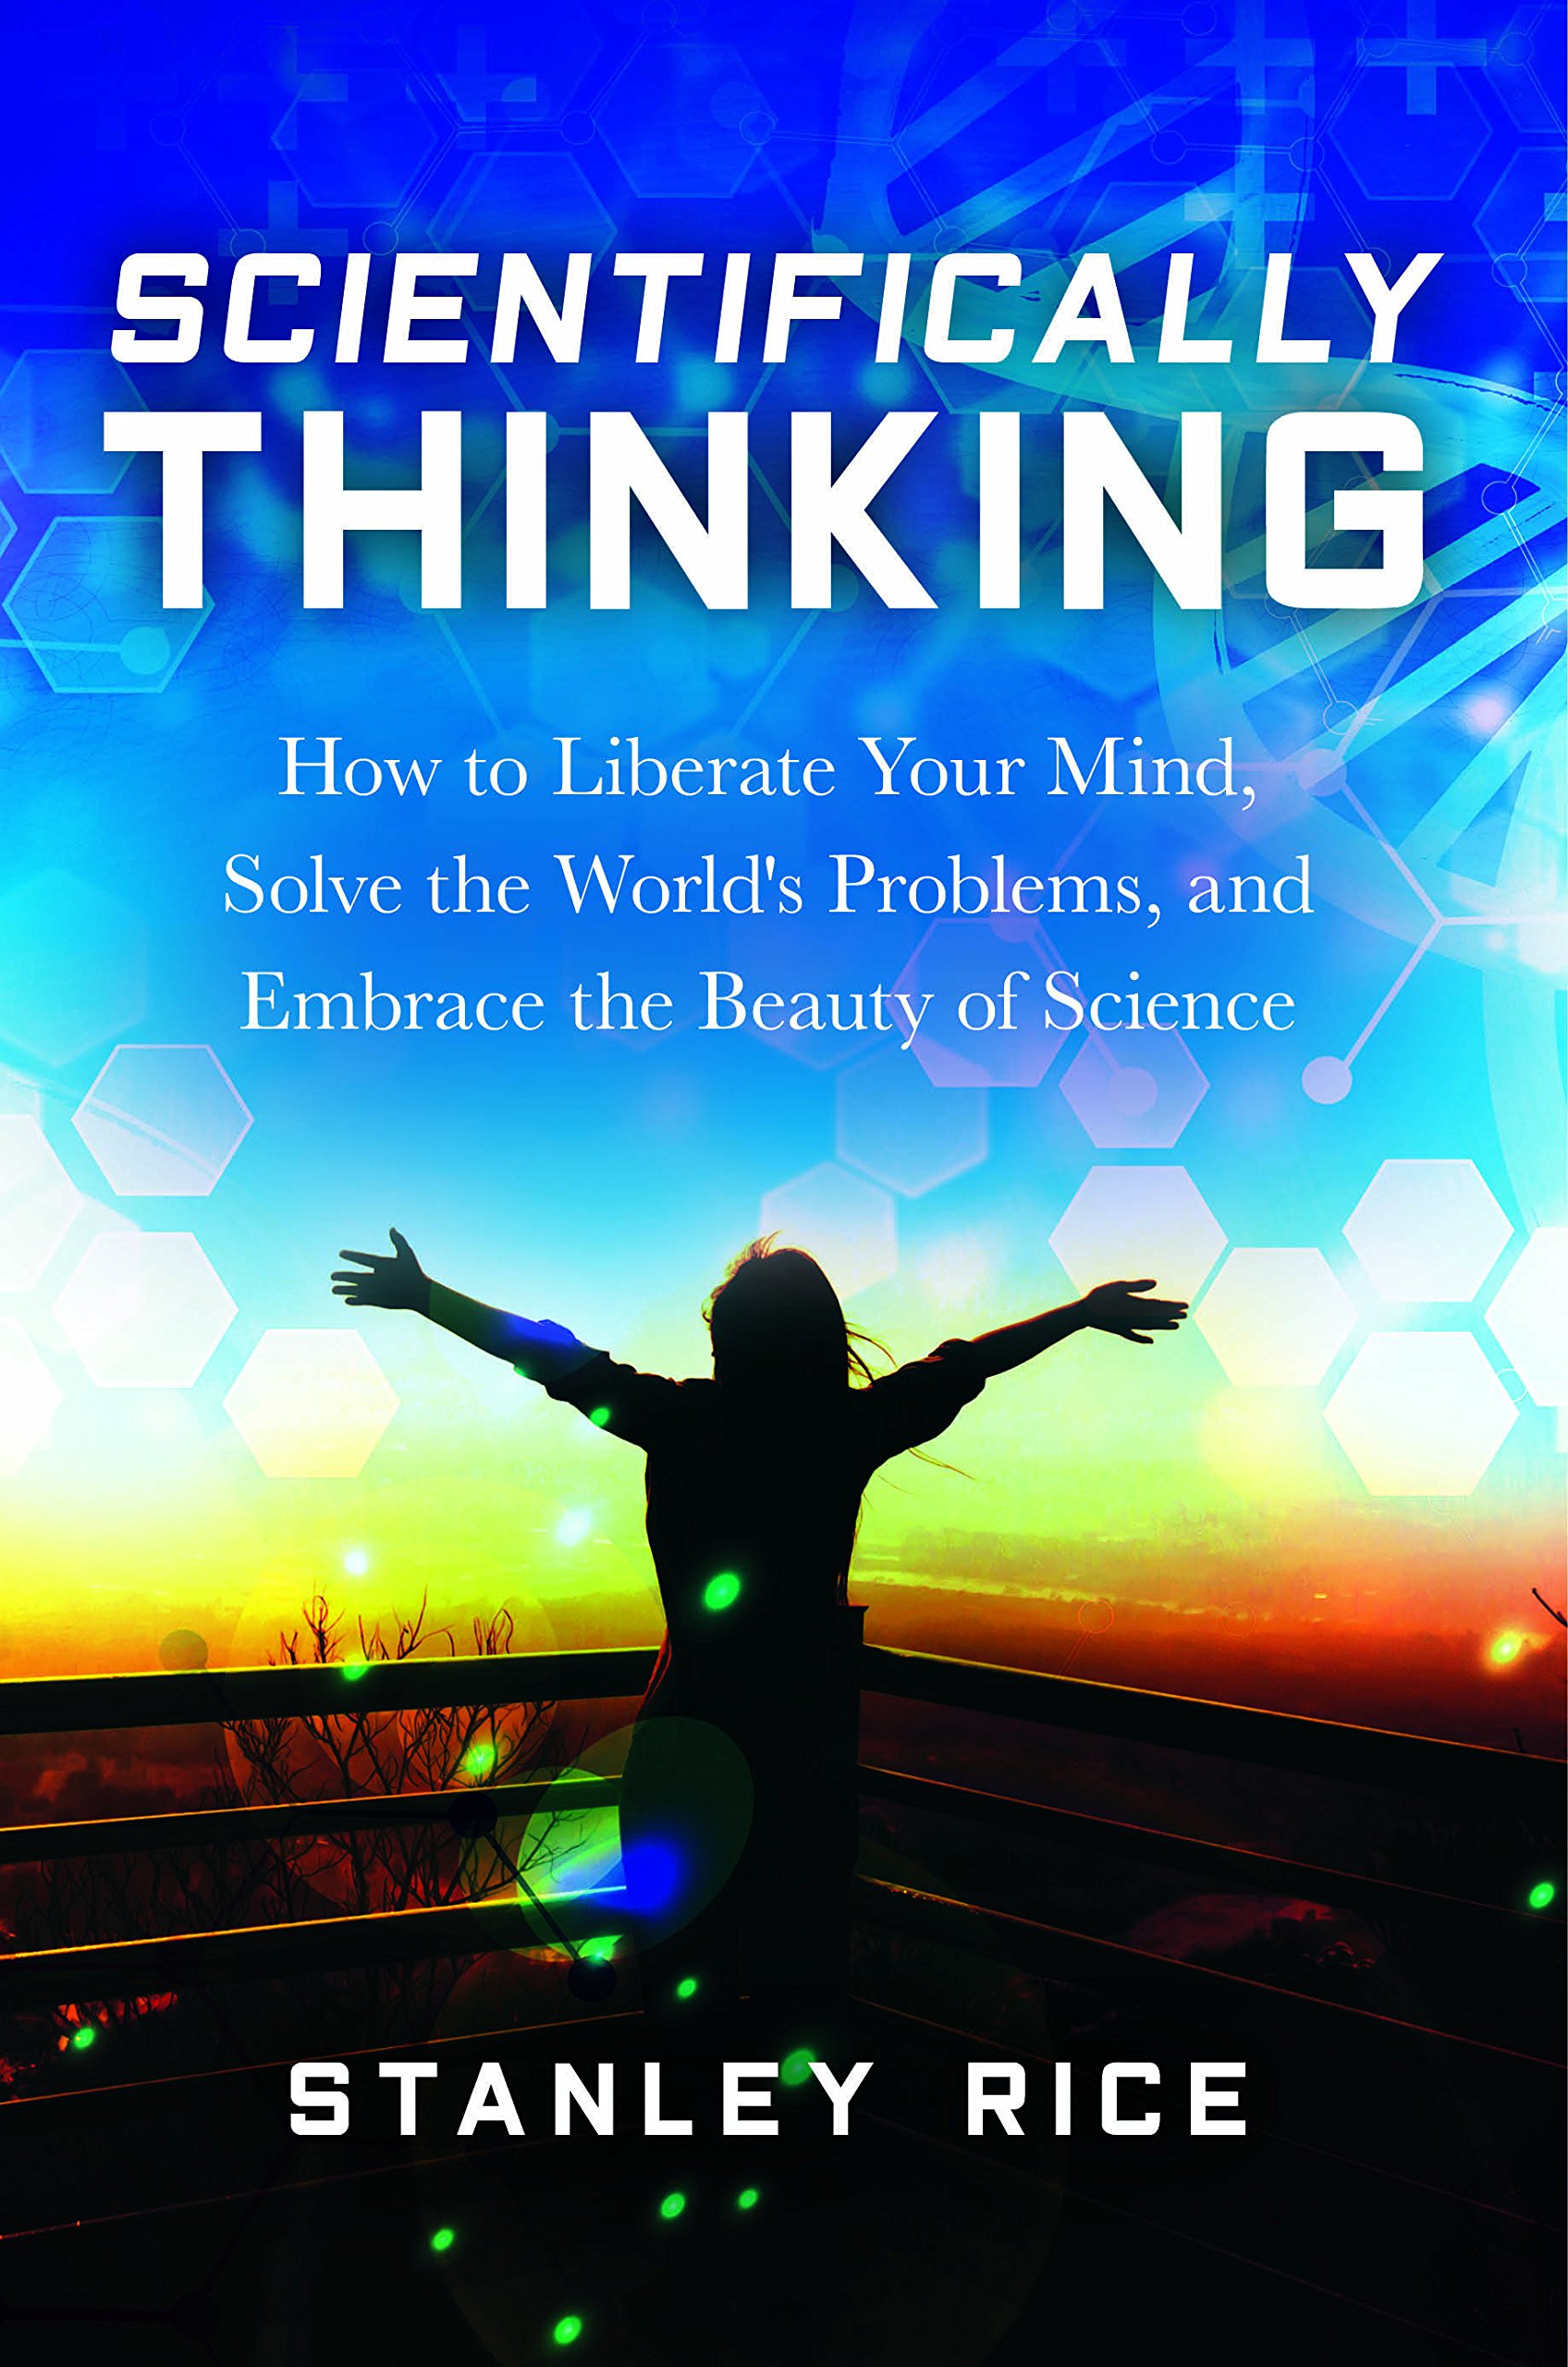 Cover of the book 'Scientifically Thinking'